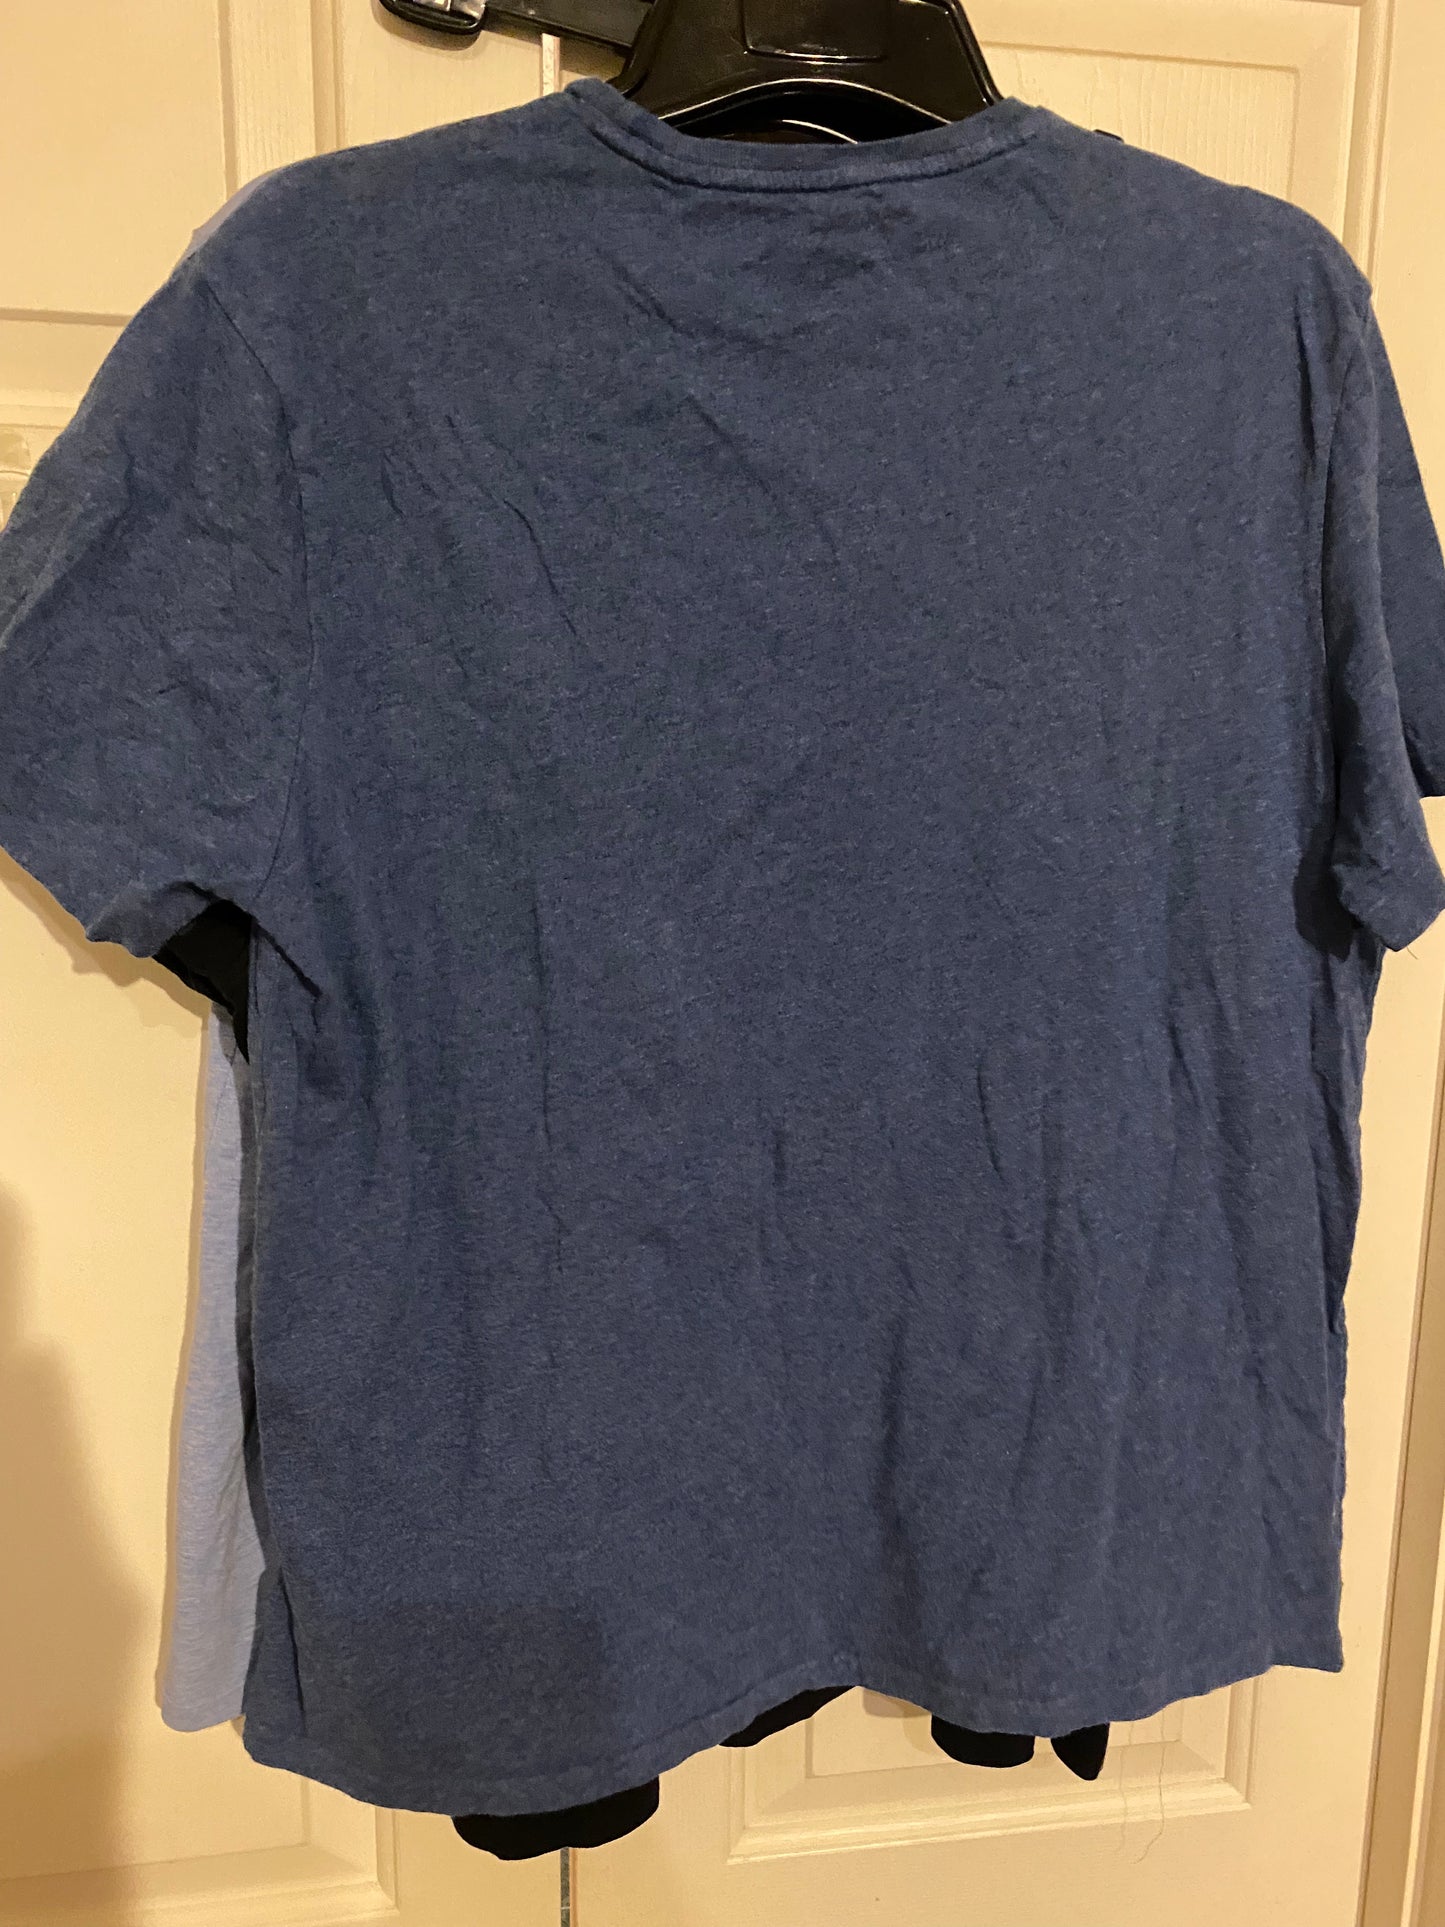 Polo Ralph Lauren Classic Fit Blue T-Shirt Tee Size Large With Logo